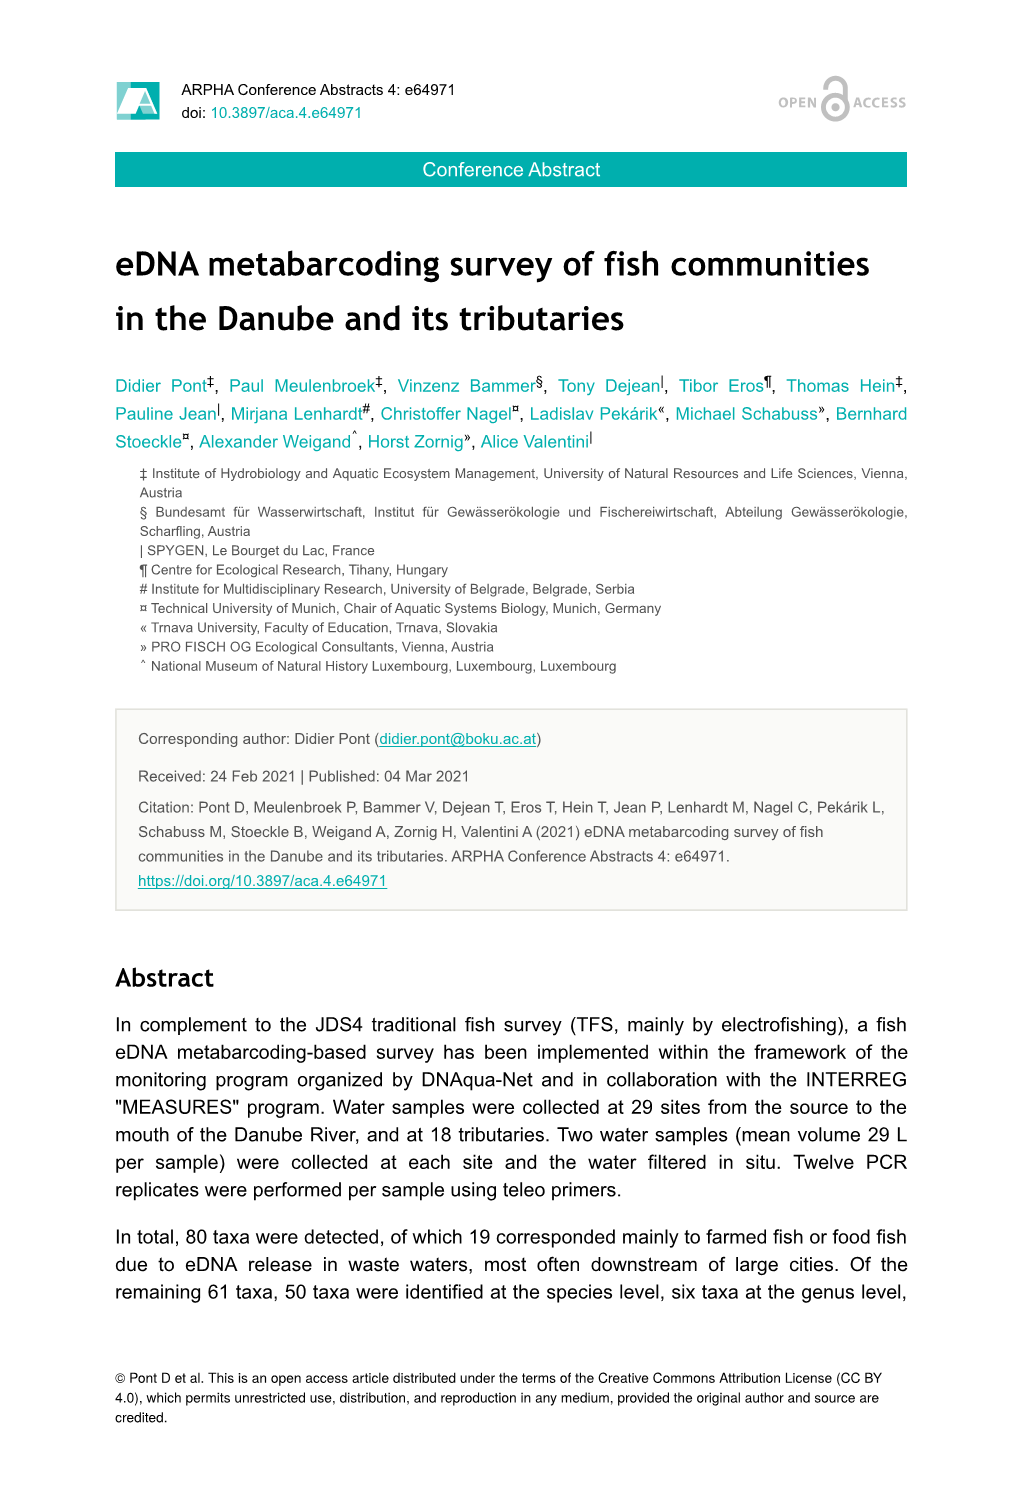 Edna Metabarcoding Survey of Fish Communities in the Danube and Its Tributaries